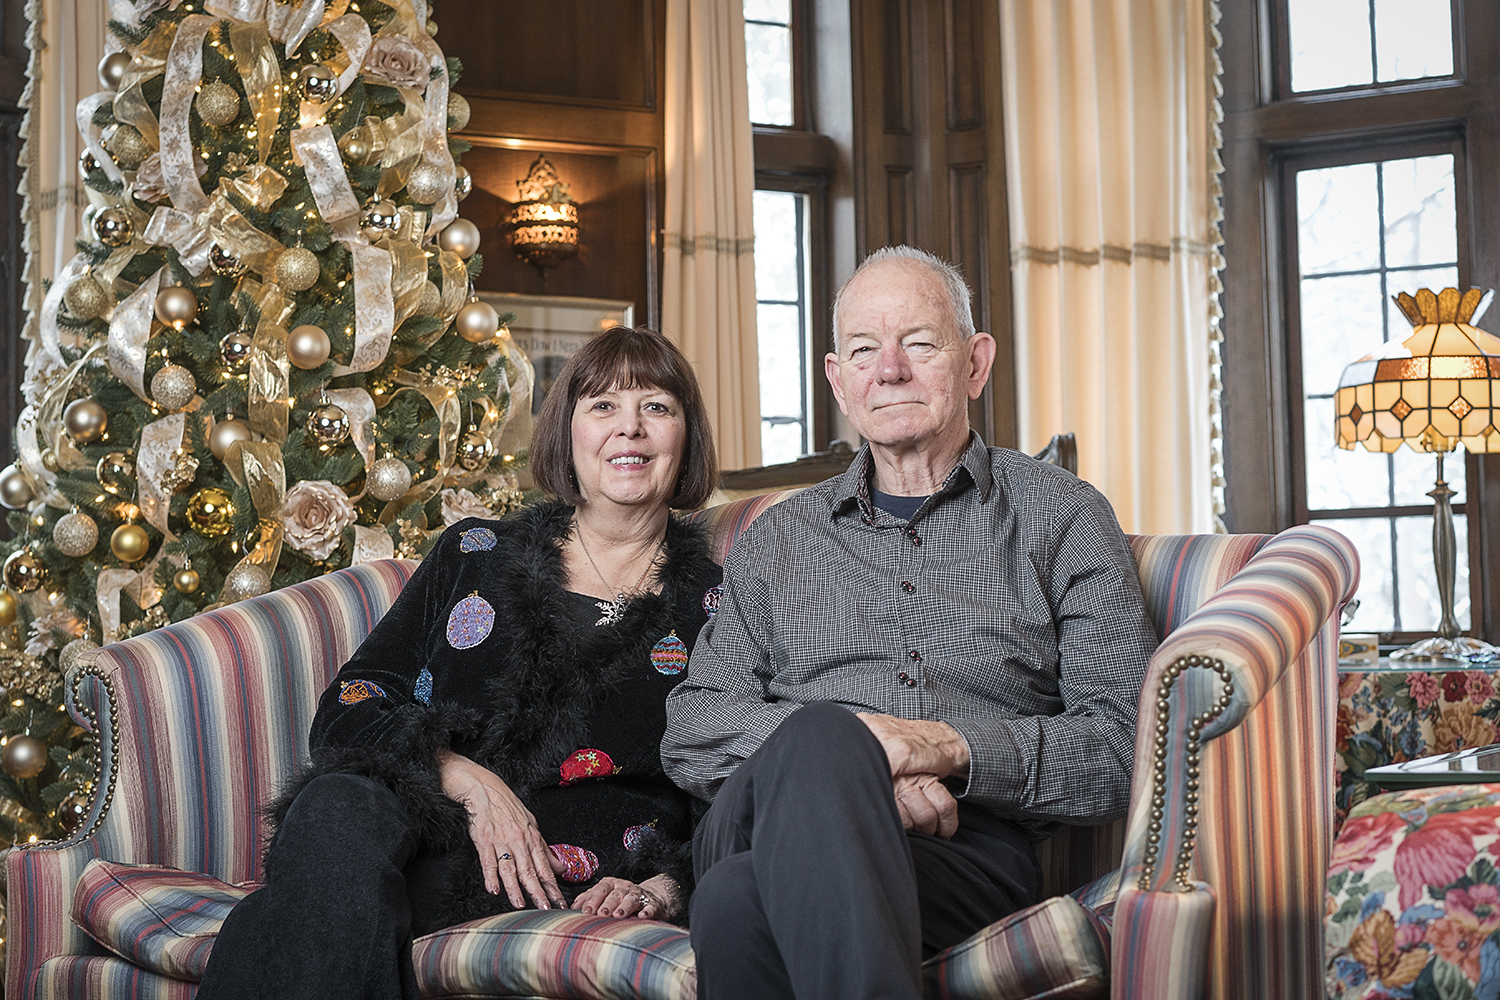 Rosanne (left) and Steve Heddy have donated over $300,000 to various charities and college funds over the past twenty years by opening their home for guests to revel in the holiday spirit and view their large Christmas tree collection.